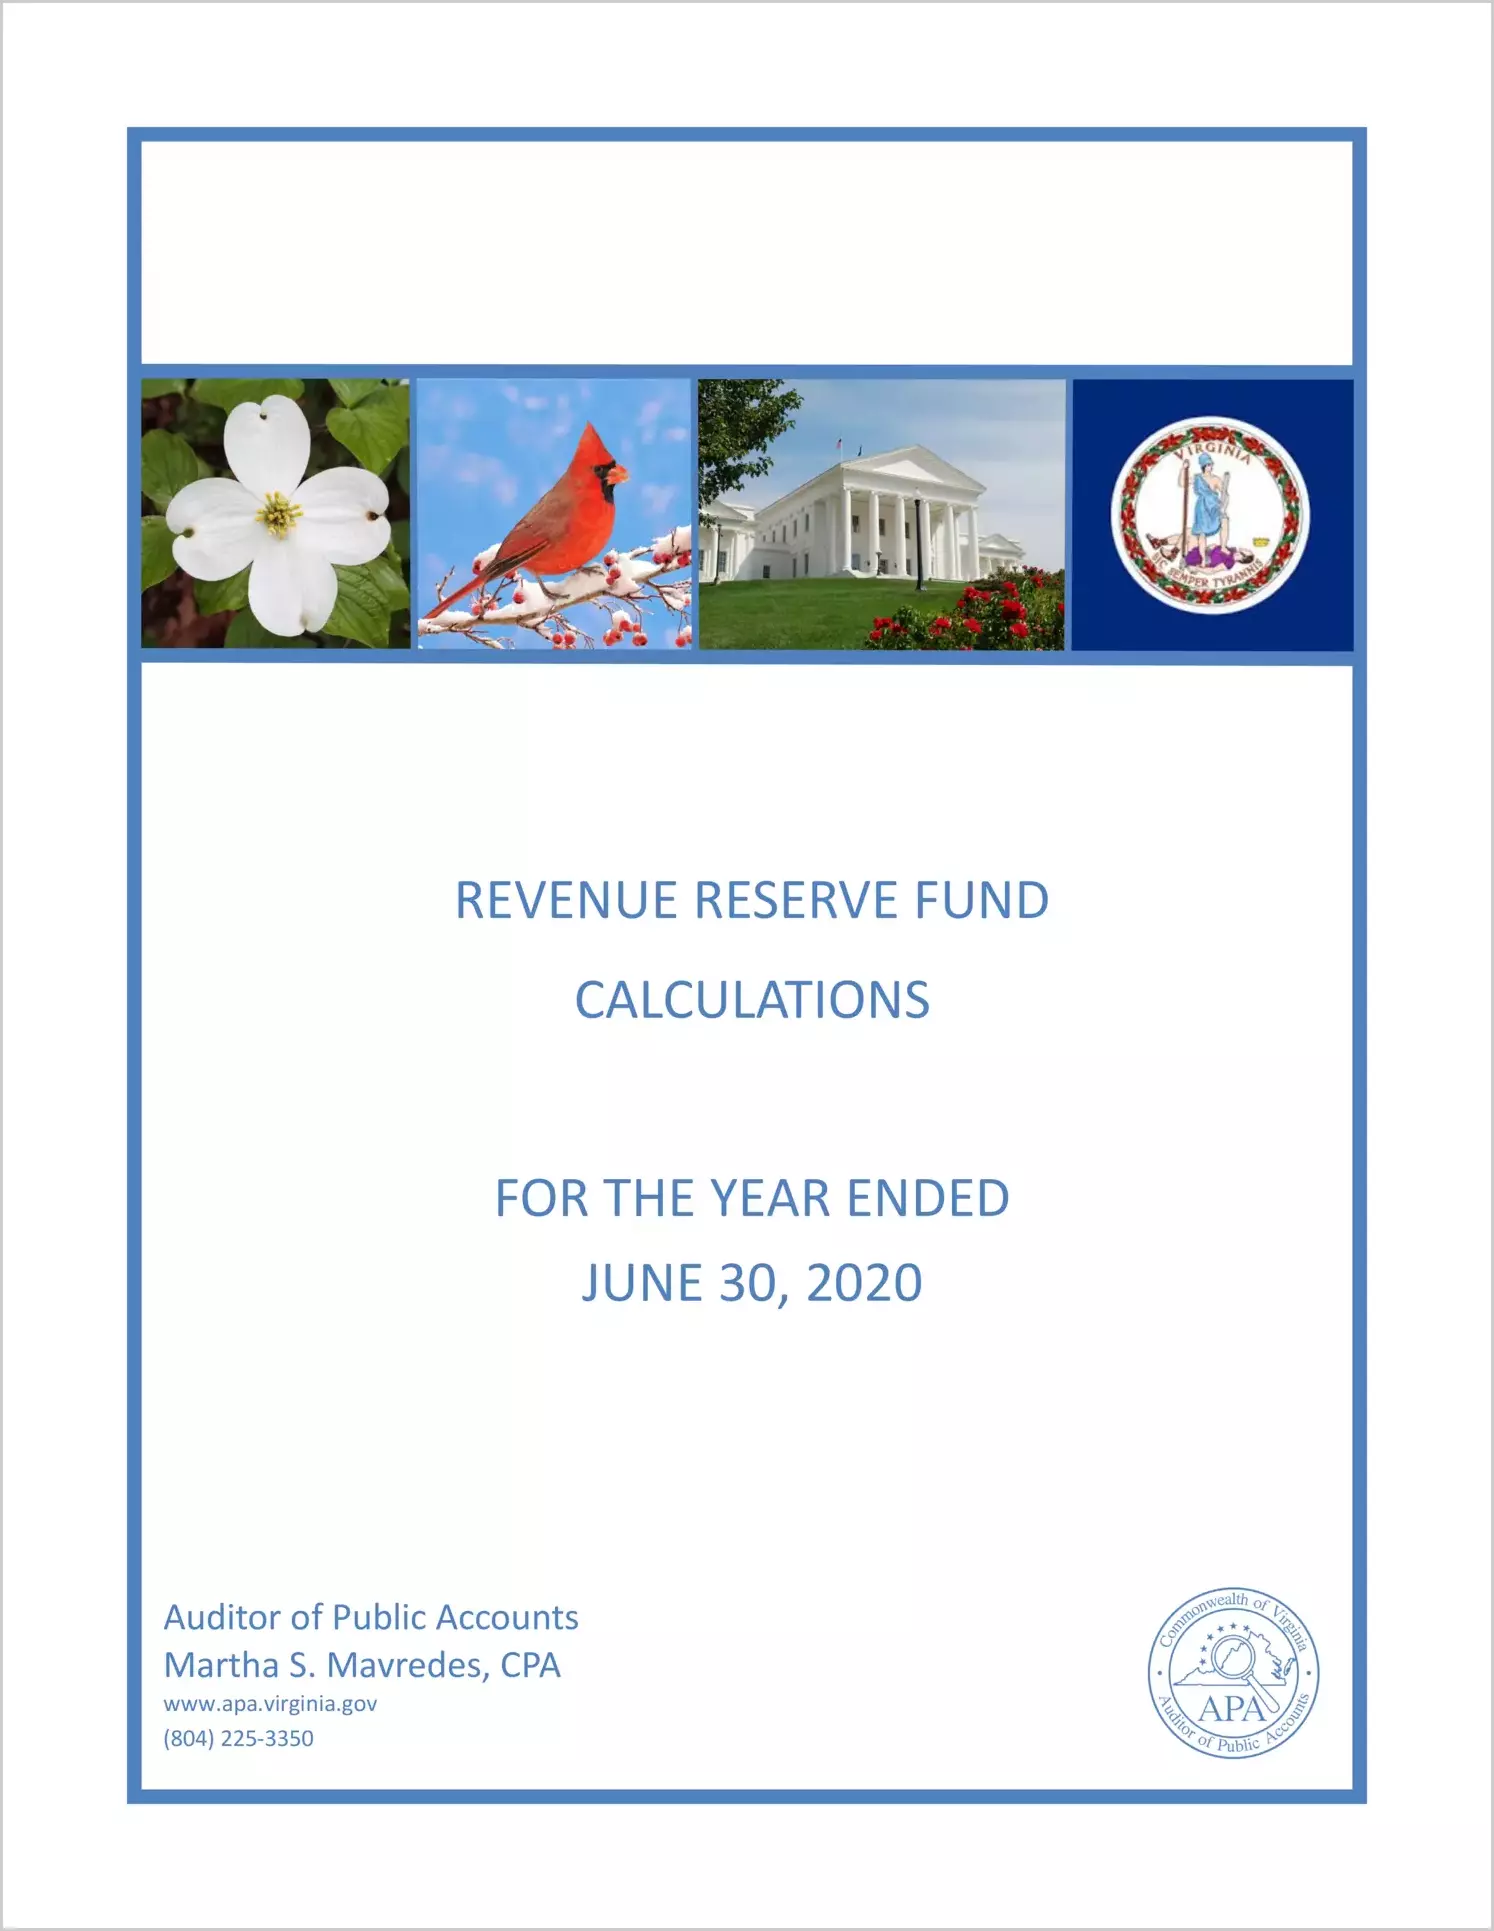 Revenue Reserve Fund Calculations for the year ended June 30, 2020